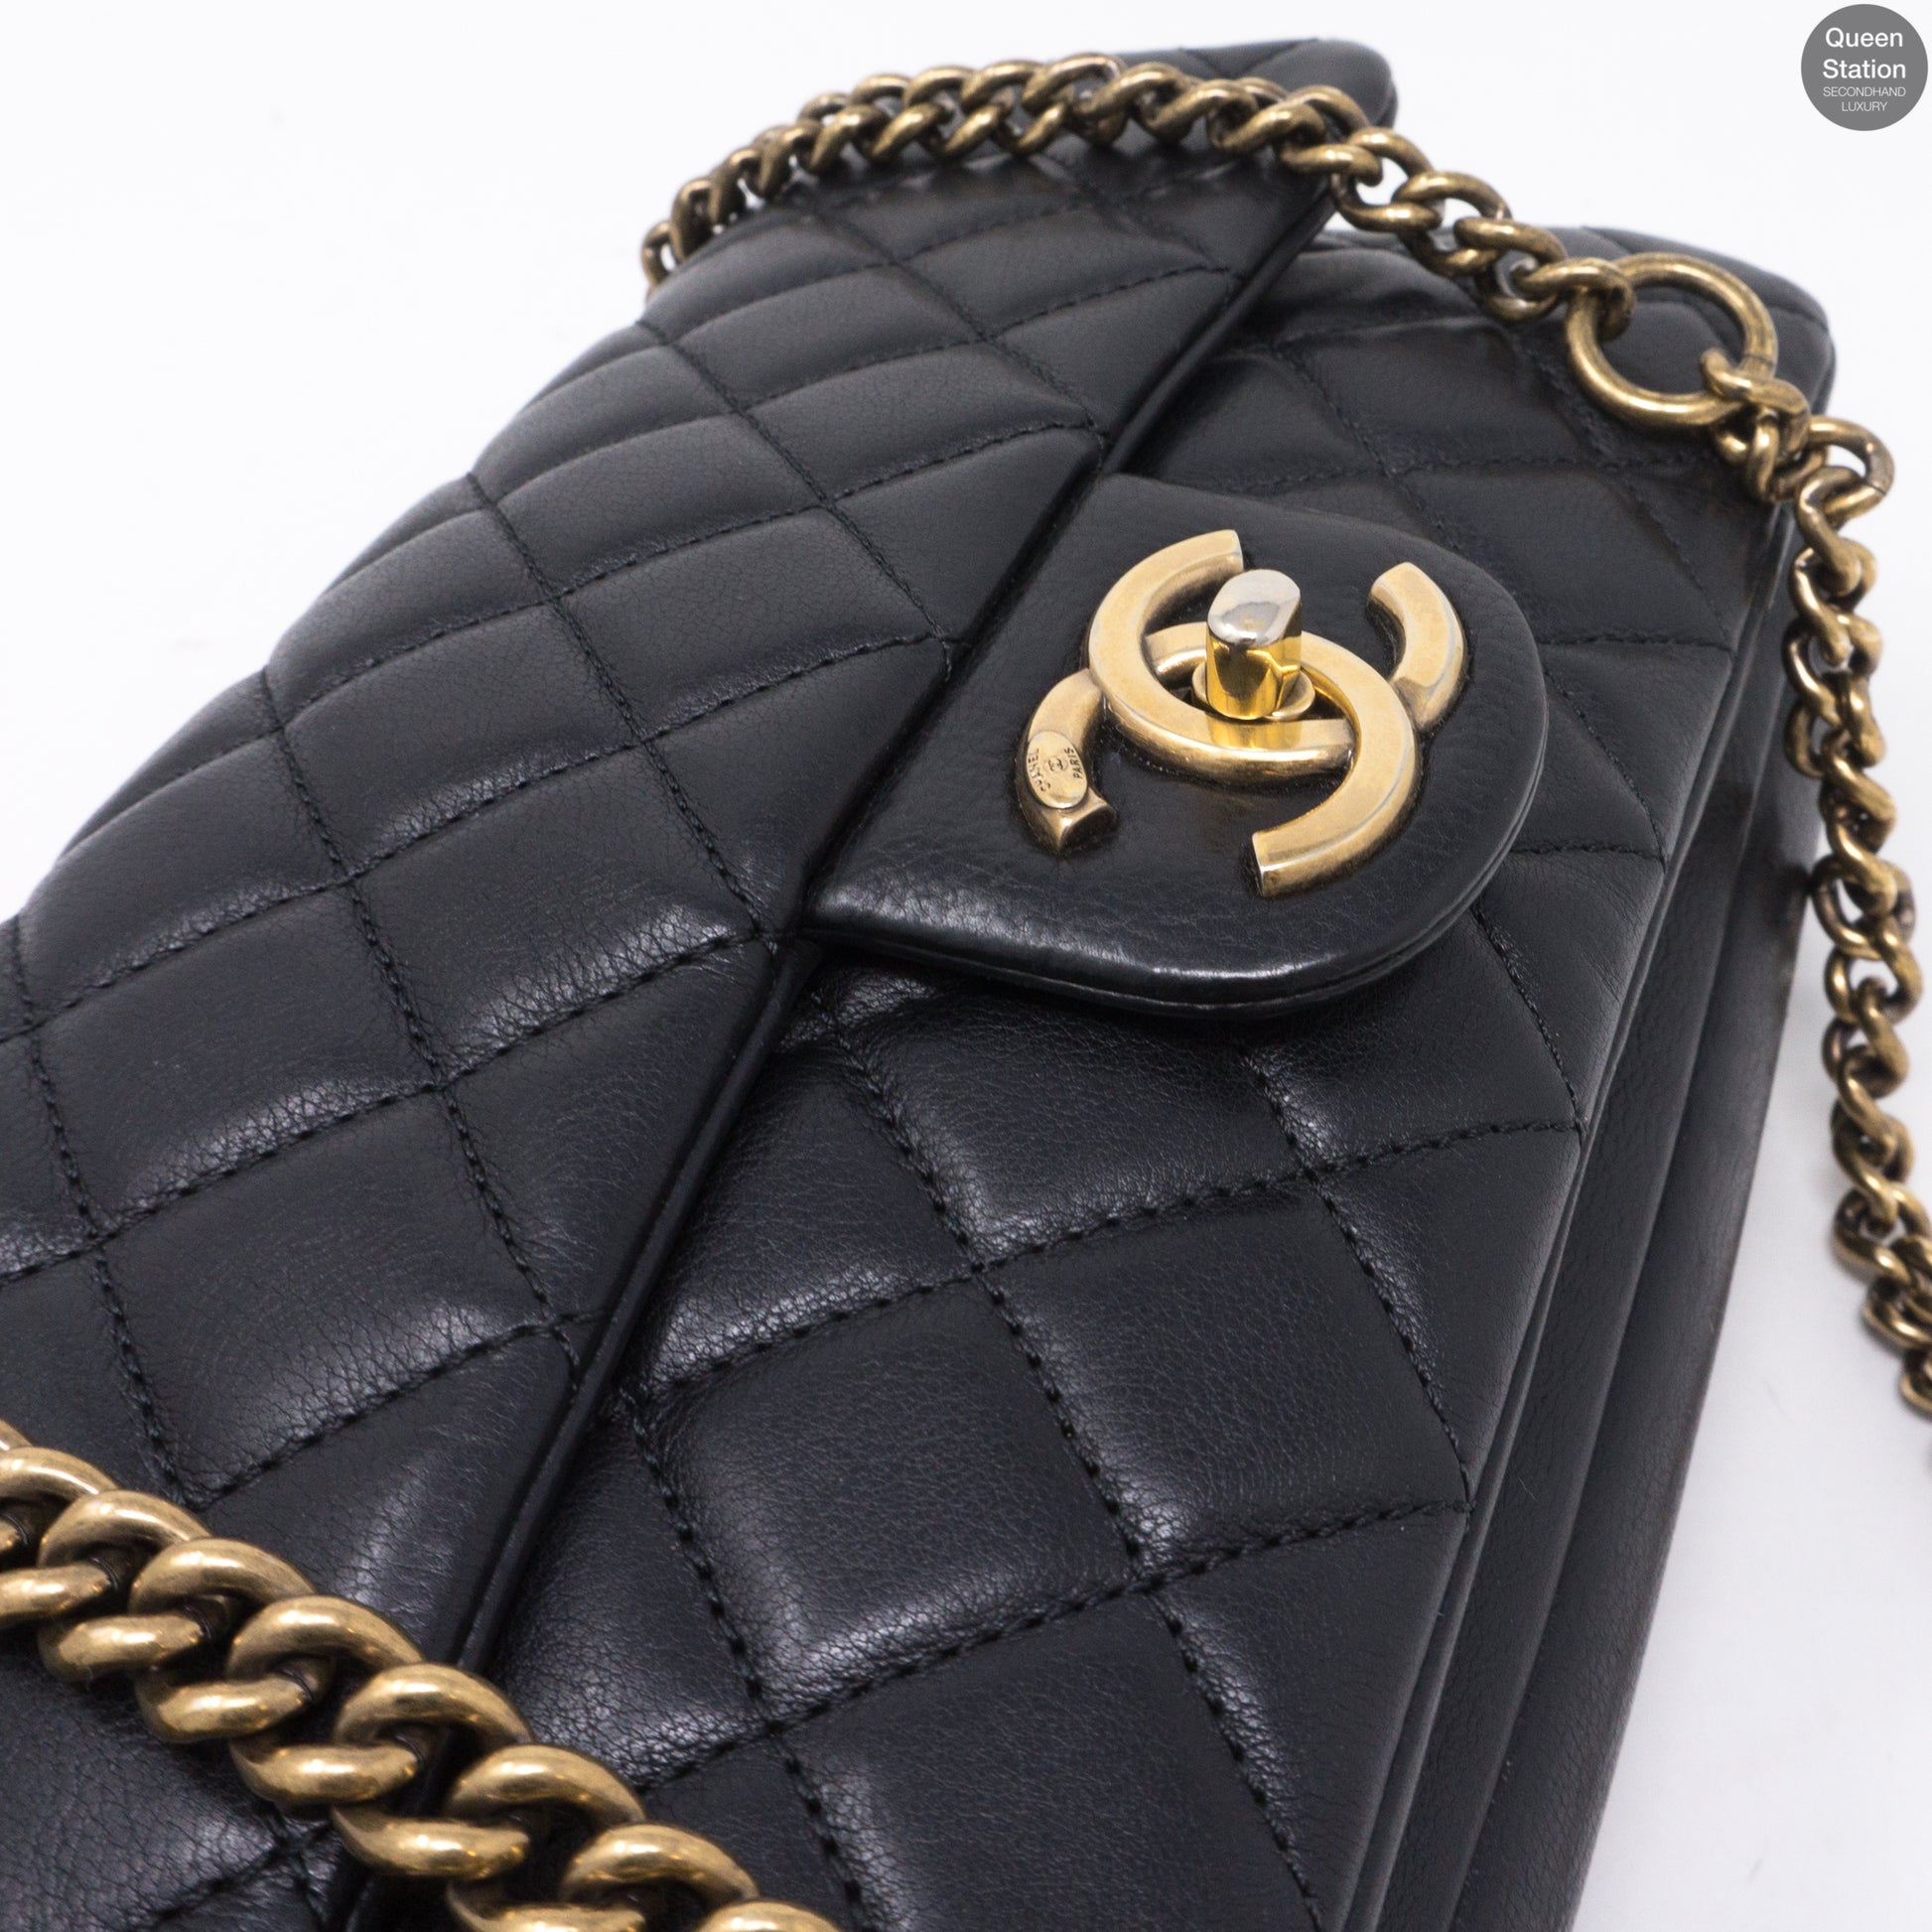 Chanel – CC Crown Black Small Flap Bag – Queen Station